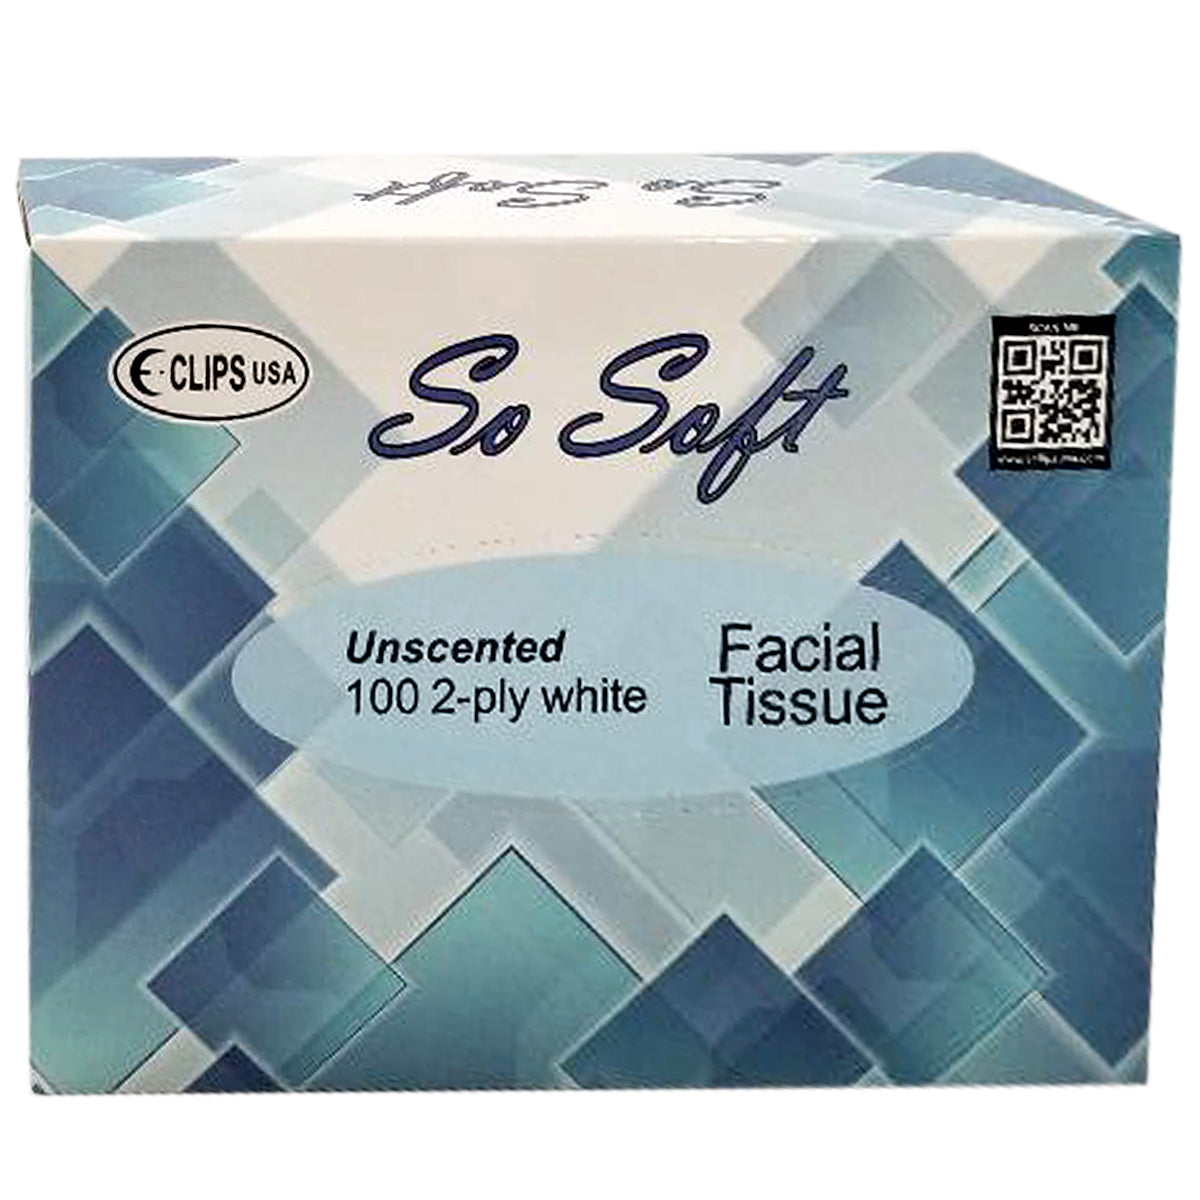 Facial Tissue Unscented - 2 Ply, 100-Count per Box